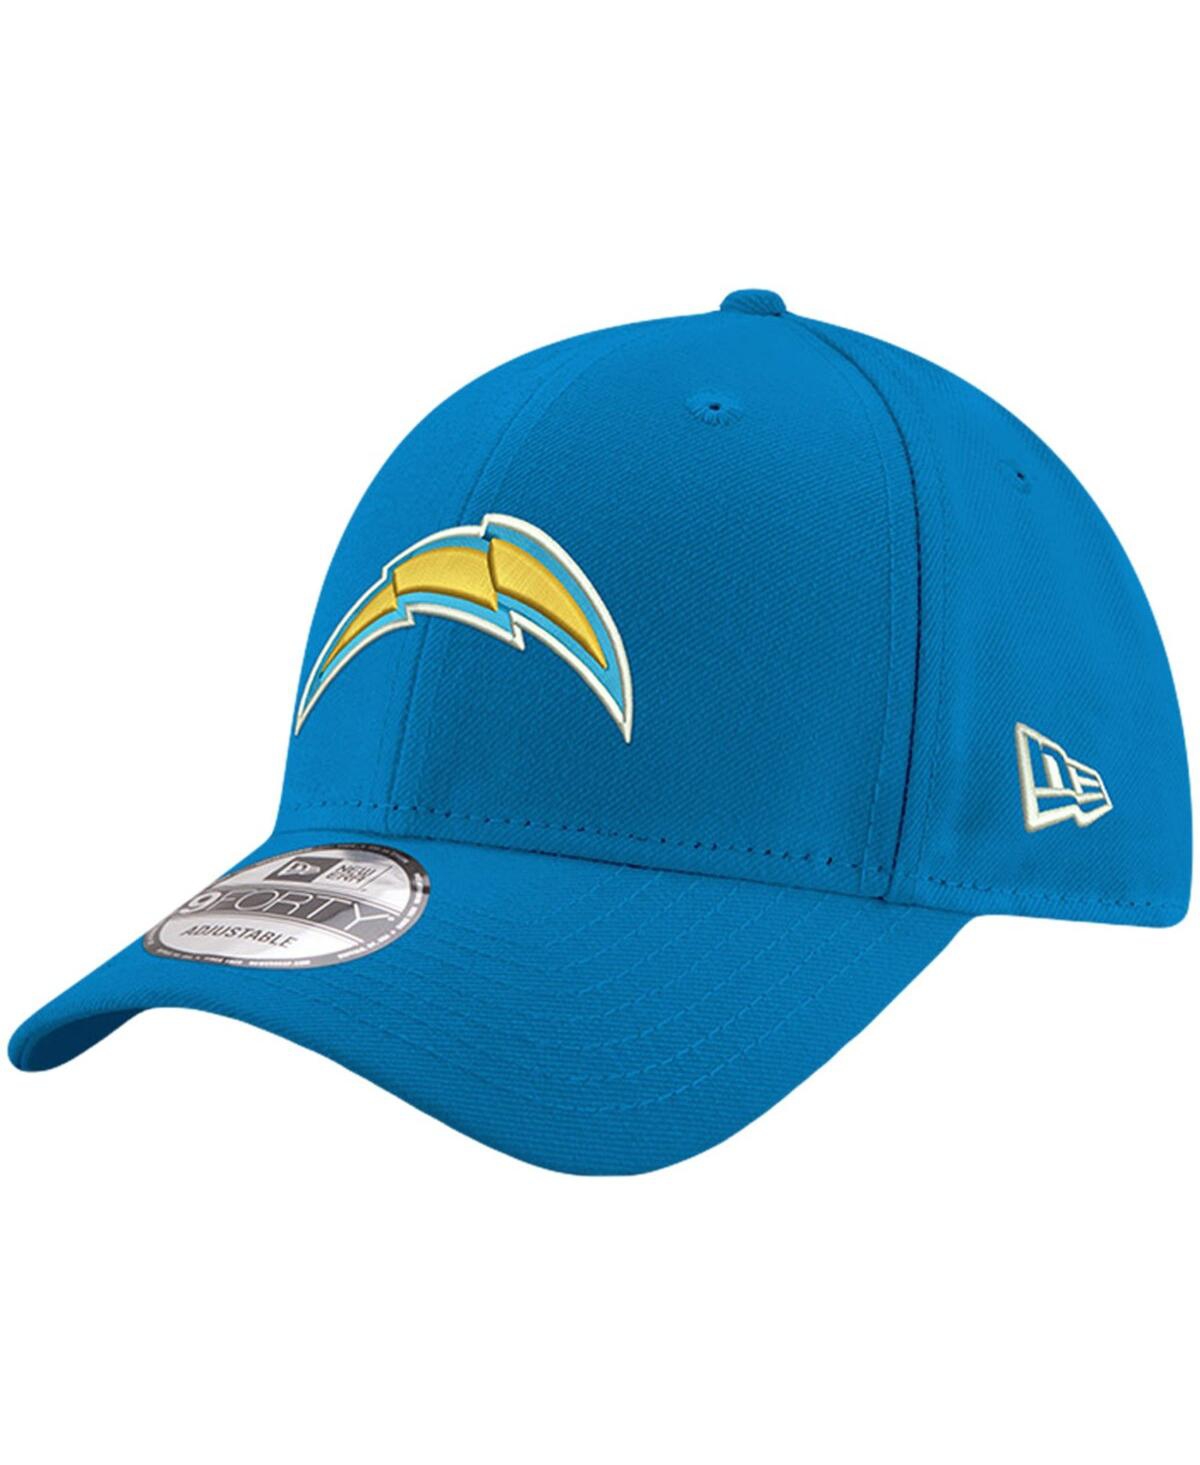 NEW ERA BIG BOYS POWDER BLUE LOS ANGELES CHARGERS LEAGUE 9FORTY ADJUSTABLE HAT